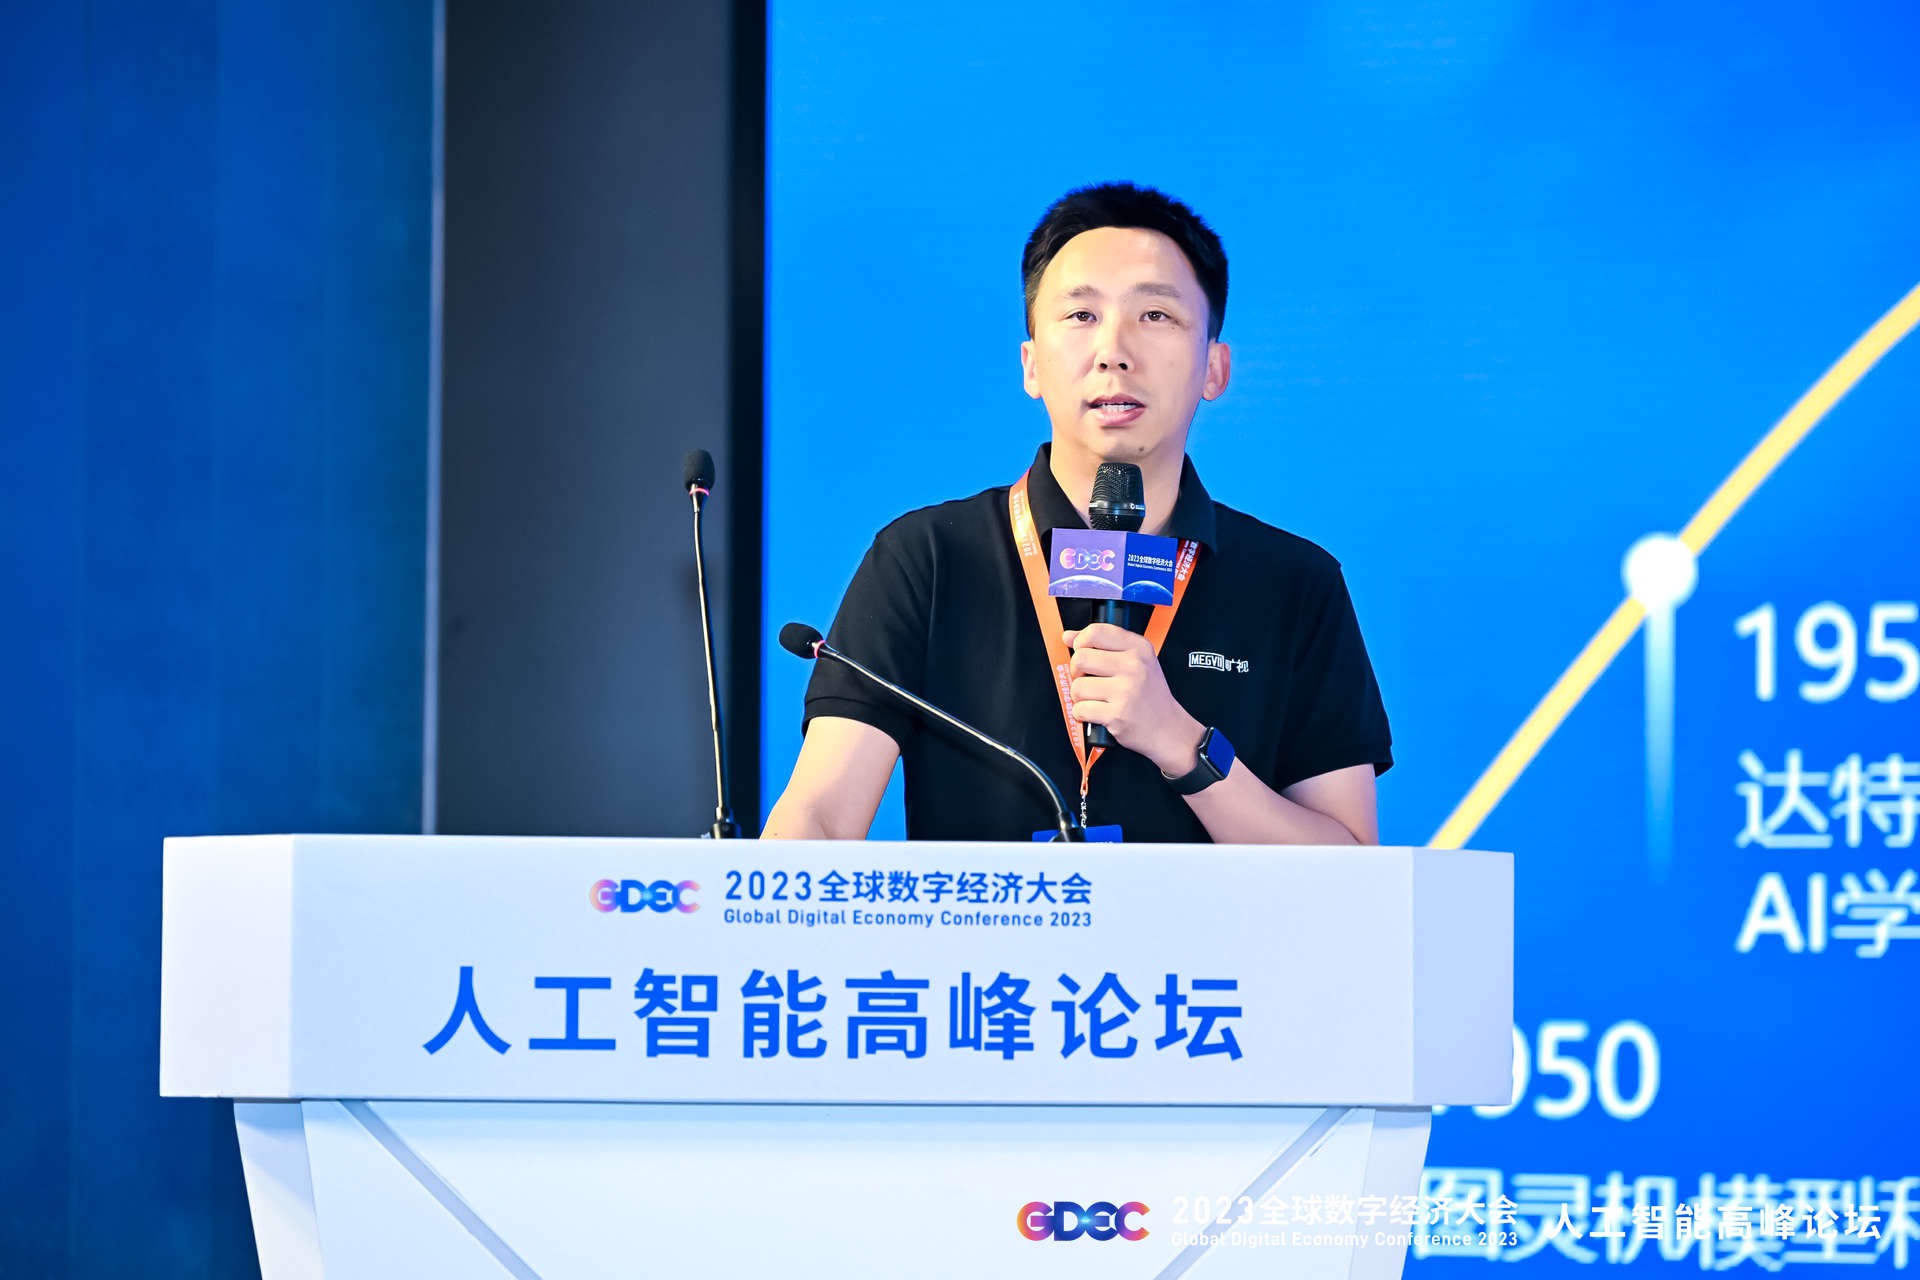 AI experts and corporate CEOs share their latest insights and progress at Beijing’s AI Summit attracting millions of online viewers“mile米乐m6”(图11)